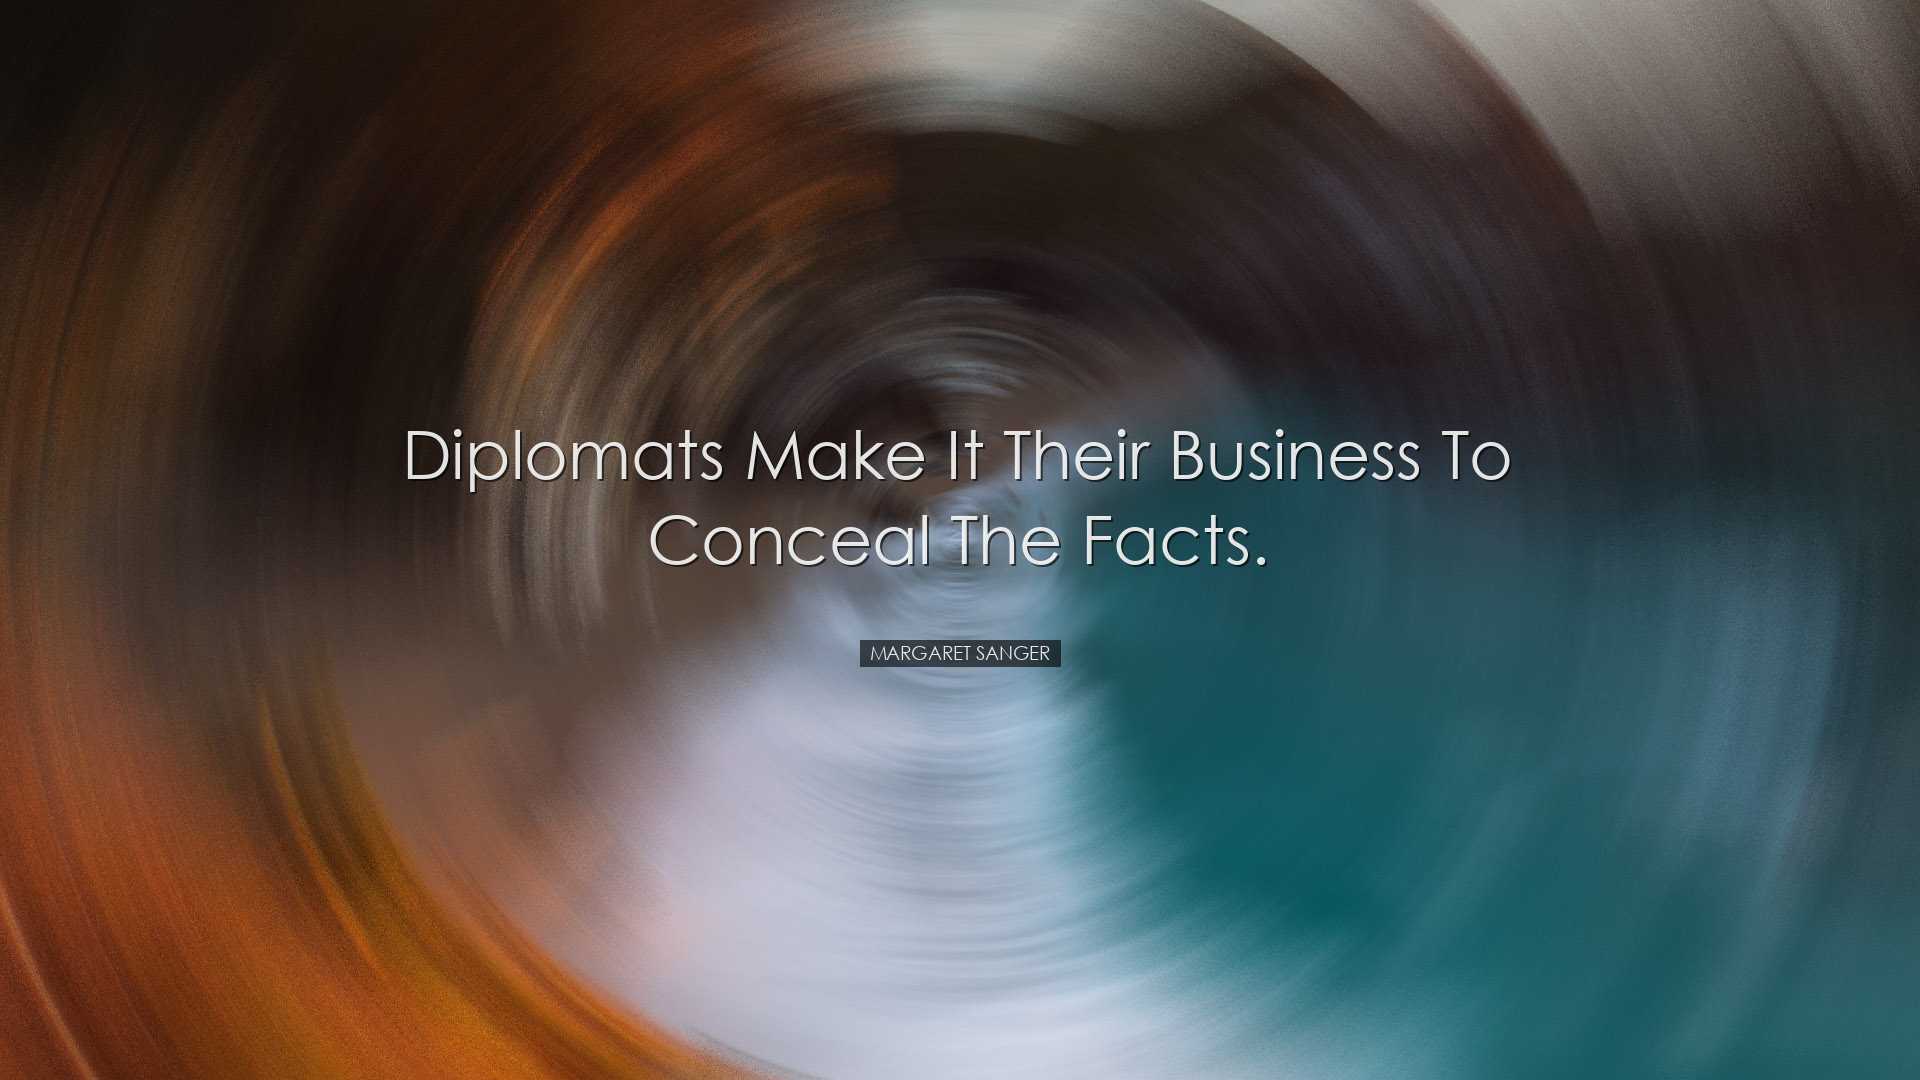 Diplomats make it their business to conceal the facts. - Margaret